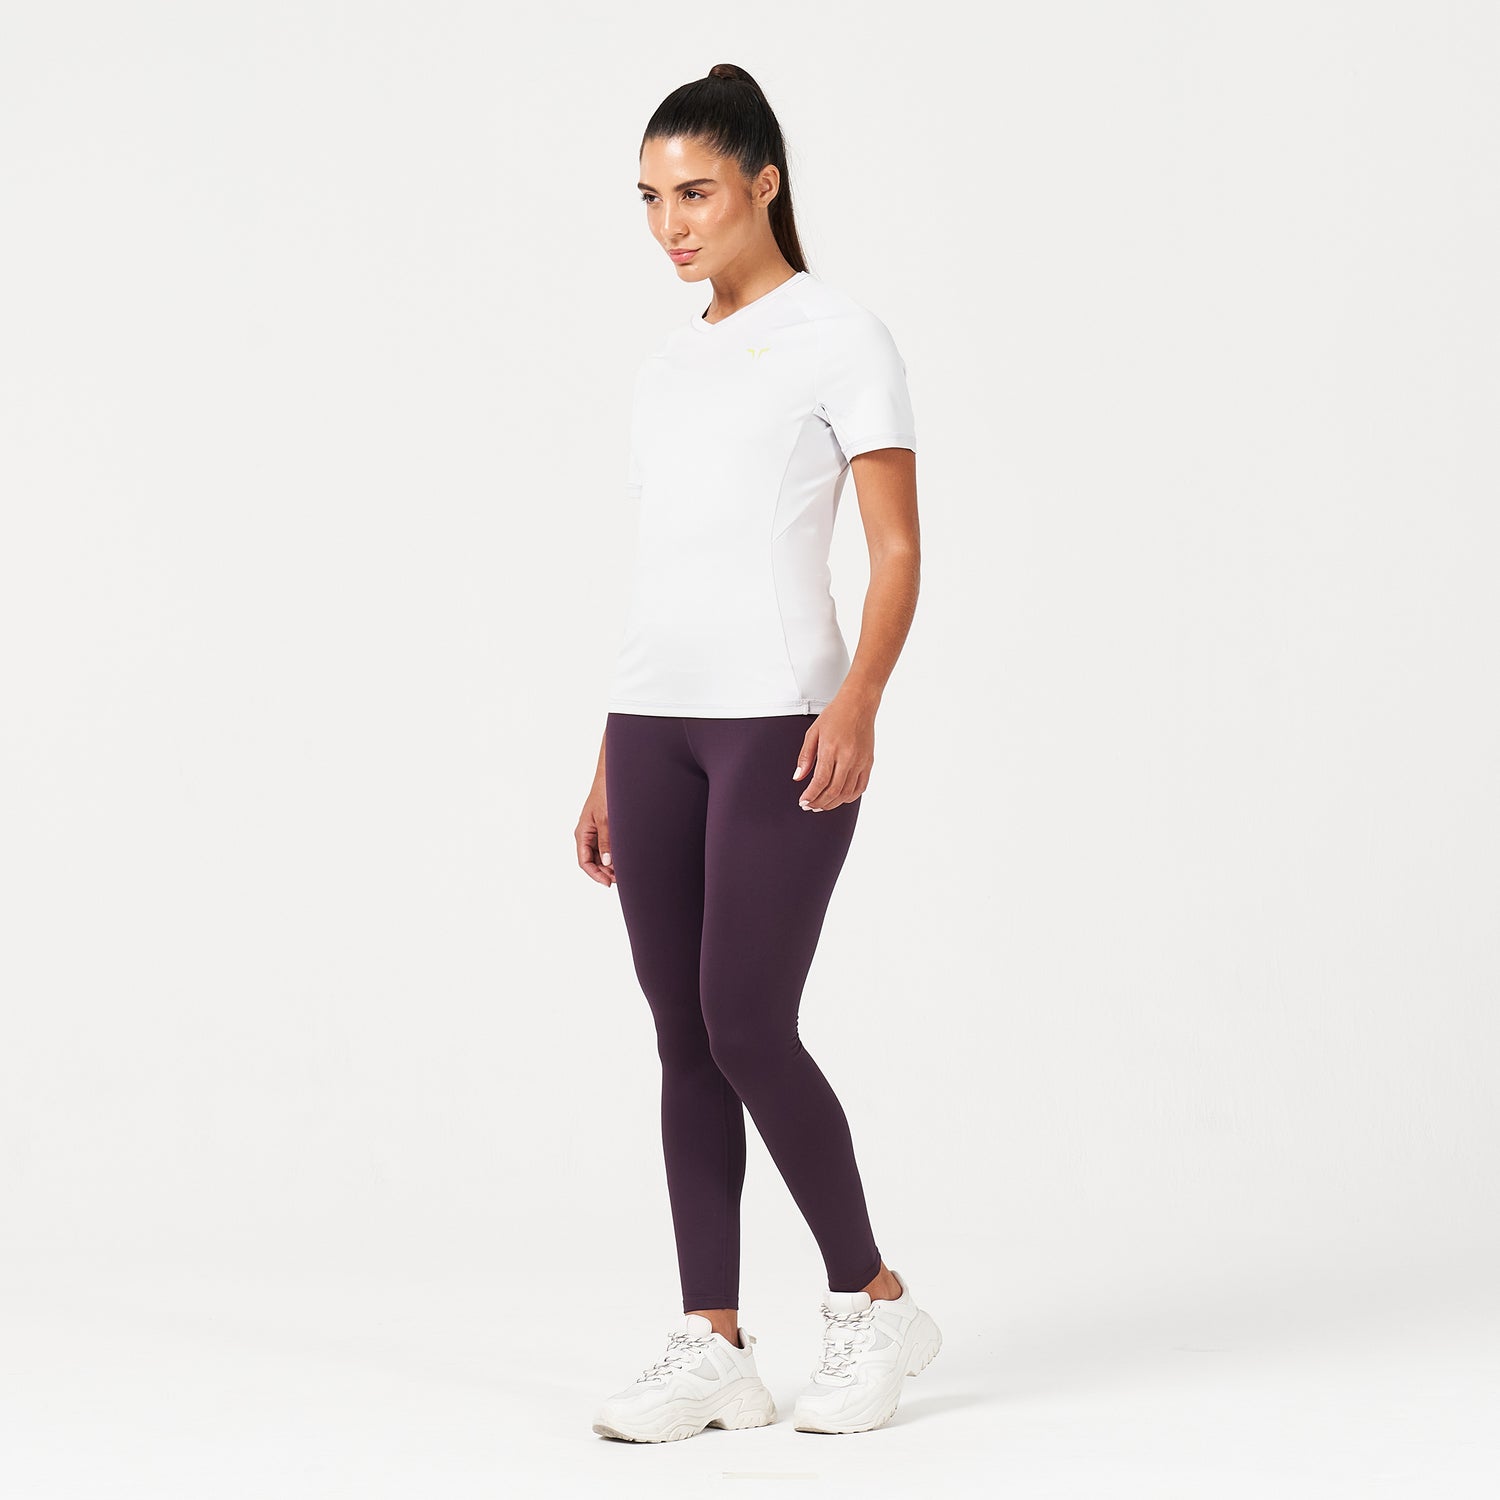 squatwolf-workout-clothes-lab360-tdry-contour-tee-lilac-hint-gym-t-shirts-for-women